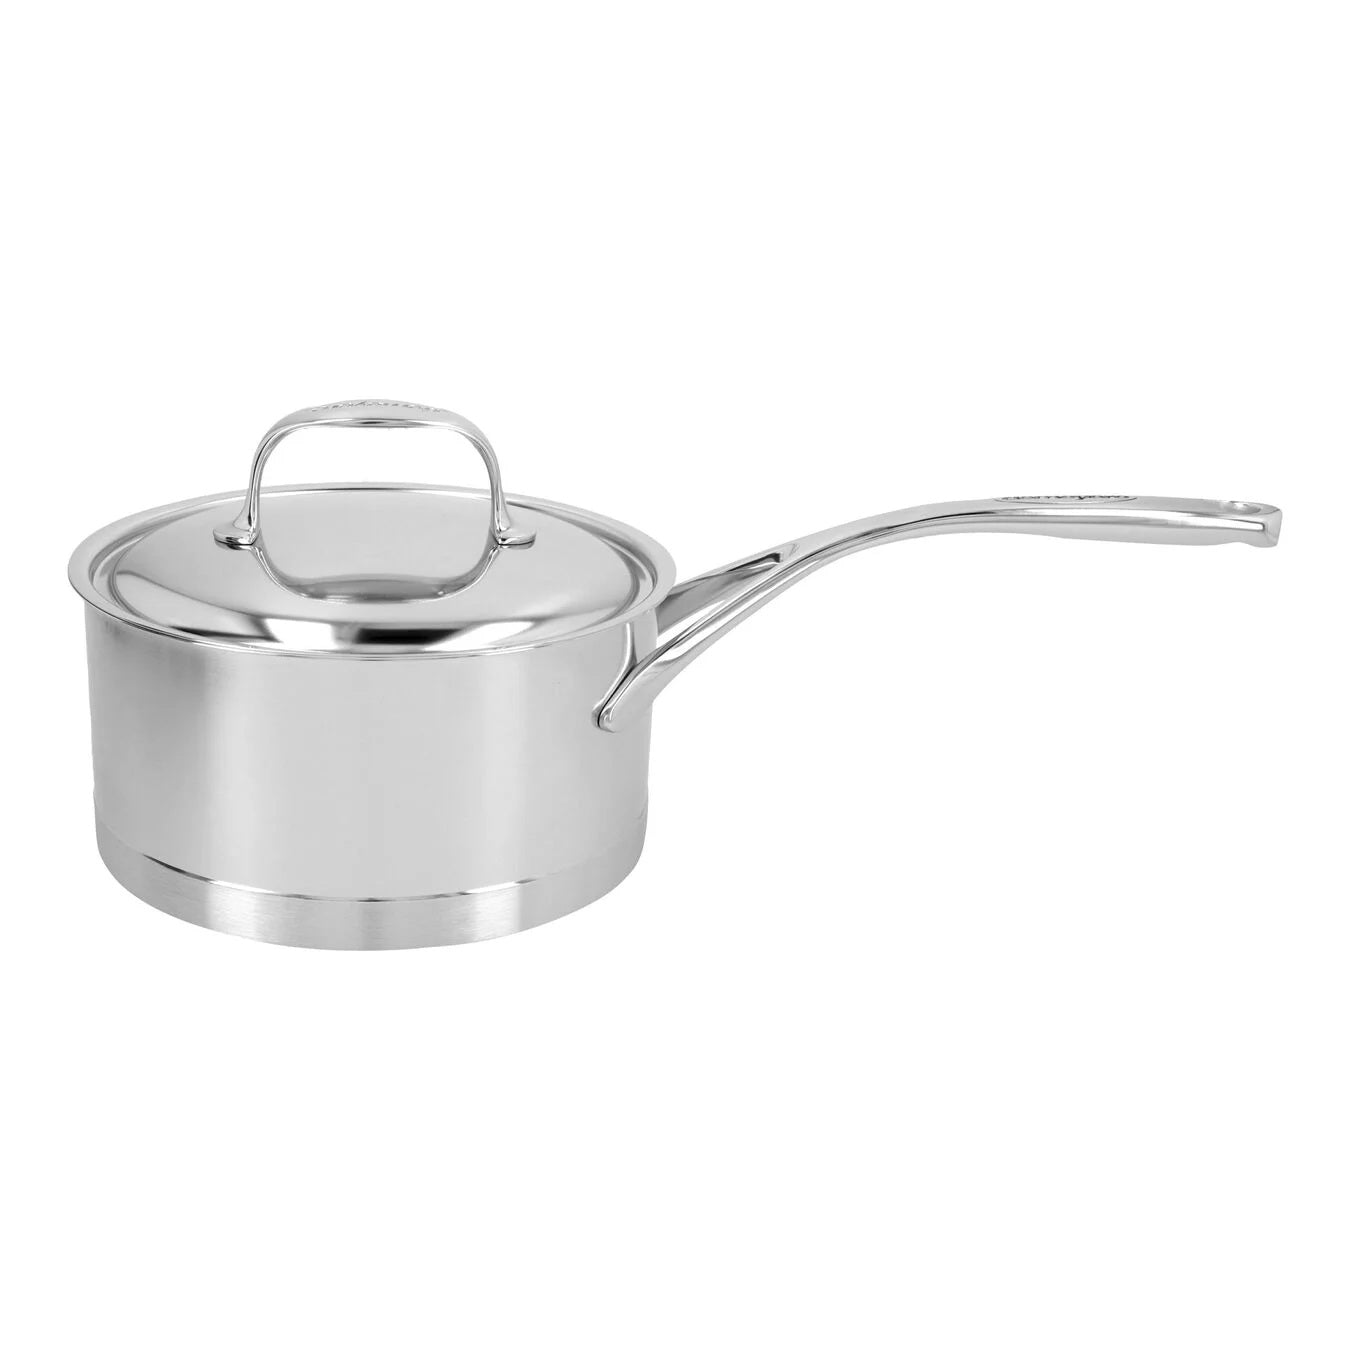 Demeyere Atlantis 7 Collection 2.2L 18/10 Stainless Steel Round Sauce Pan with Lid